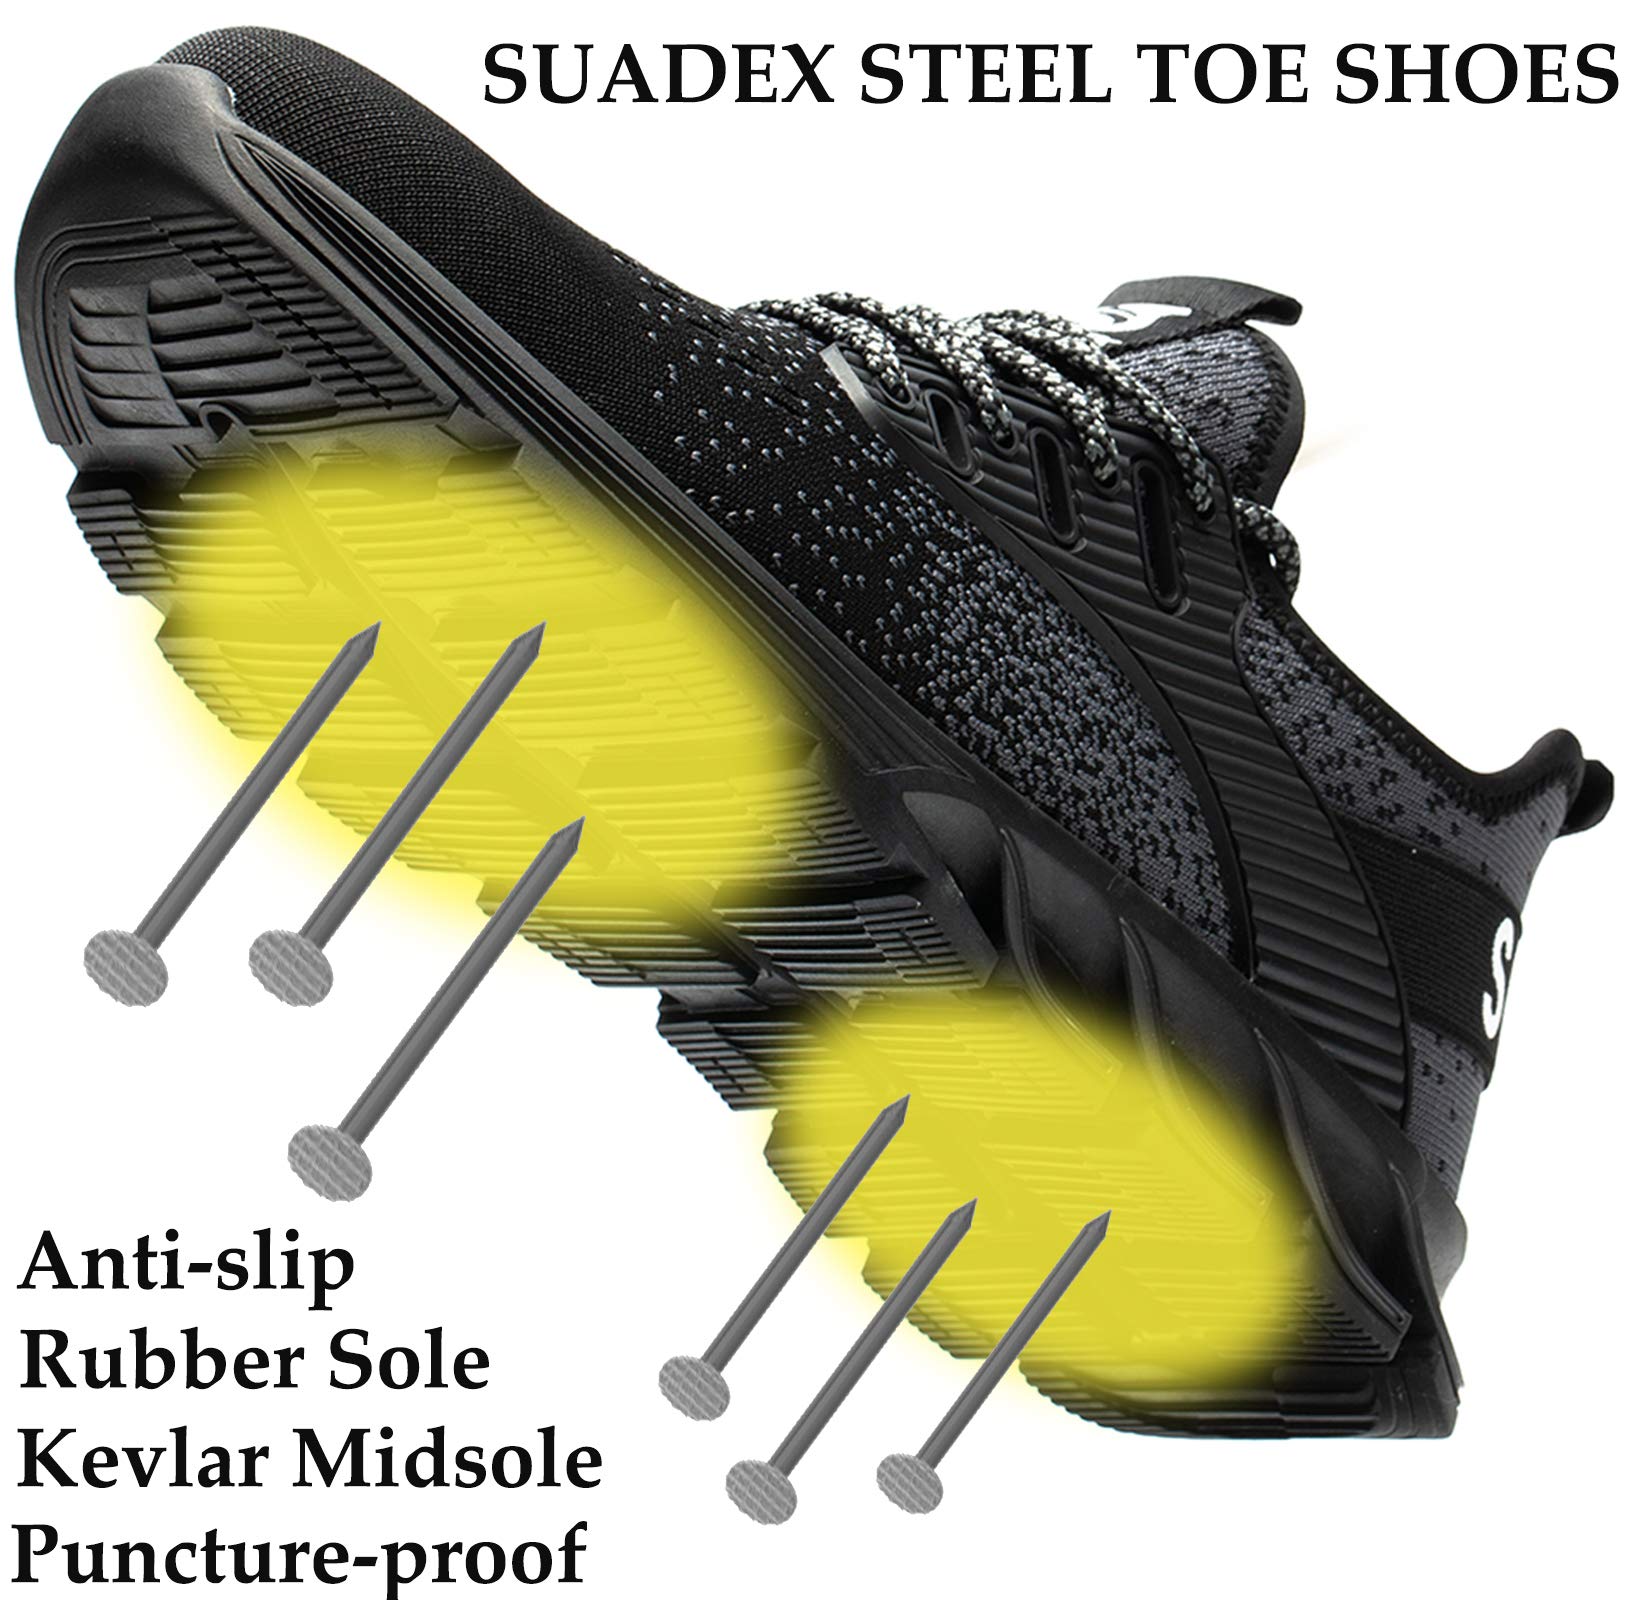 SUADEX Steel Toe Shoes for Men Women Indestructible Work Shoes Lightweight Comfortable Safety Sneakers Slip-Resistant Composite Toe Shoes for Construction